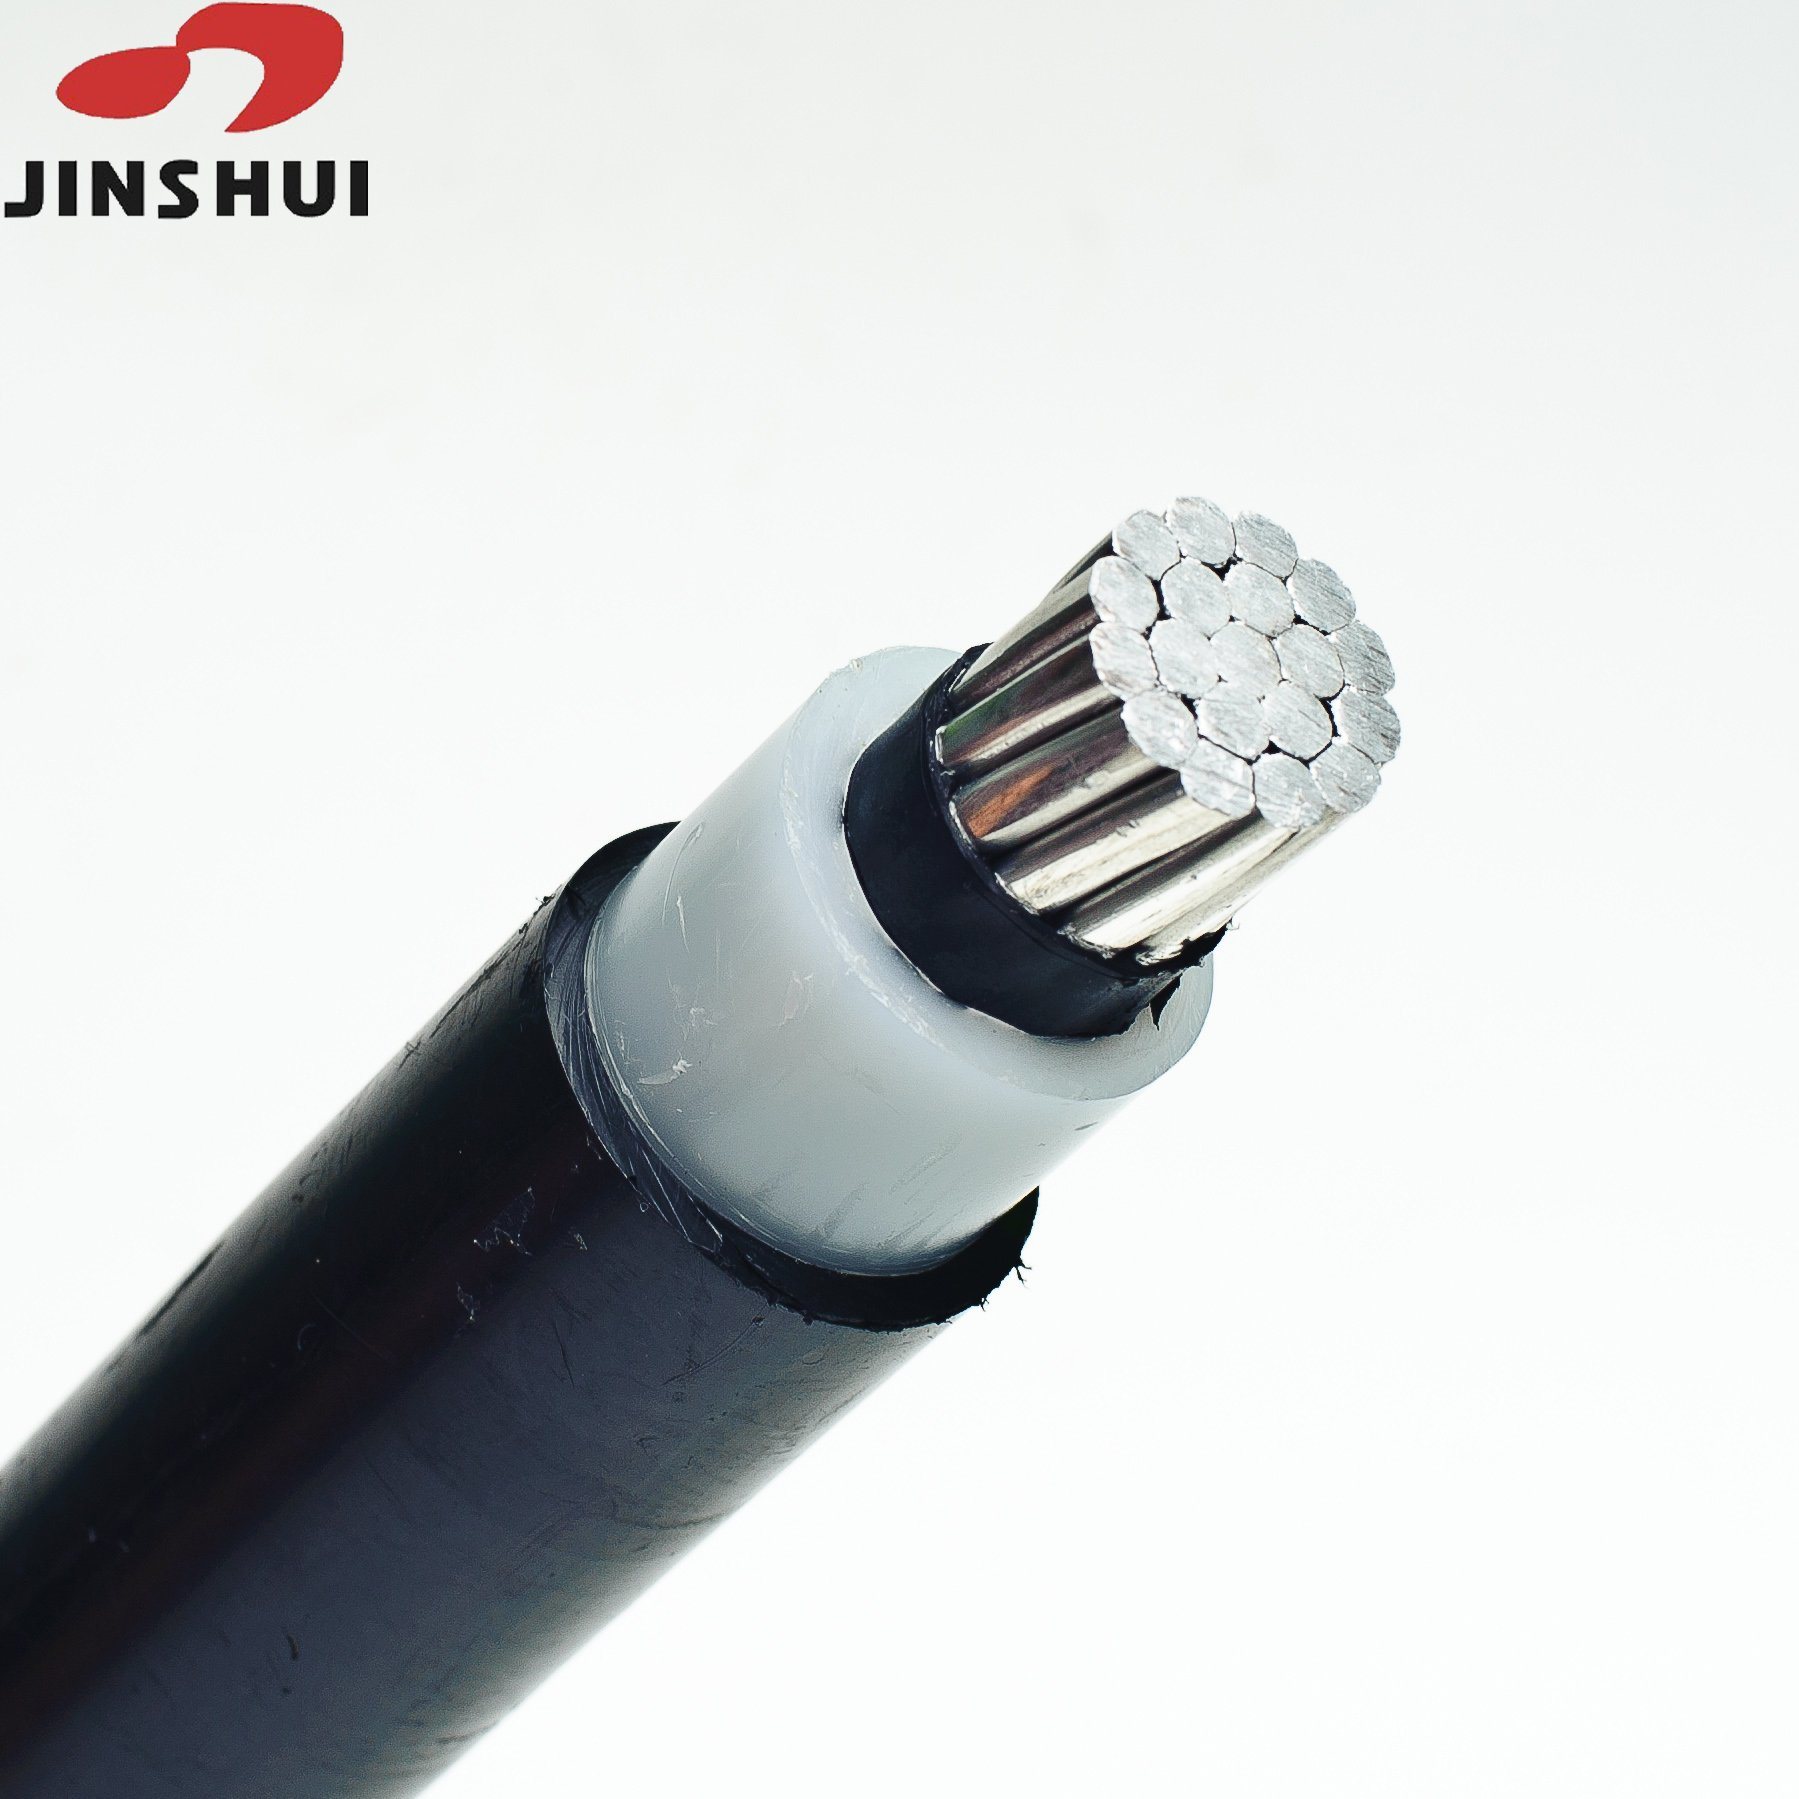 Jinshui 0.6/1kv Middle Voltage Cable XLPE Insulated Aluminum Conductor Electrical Power Cable